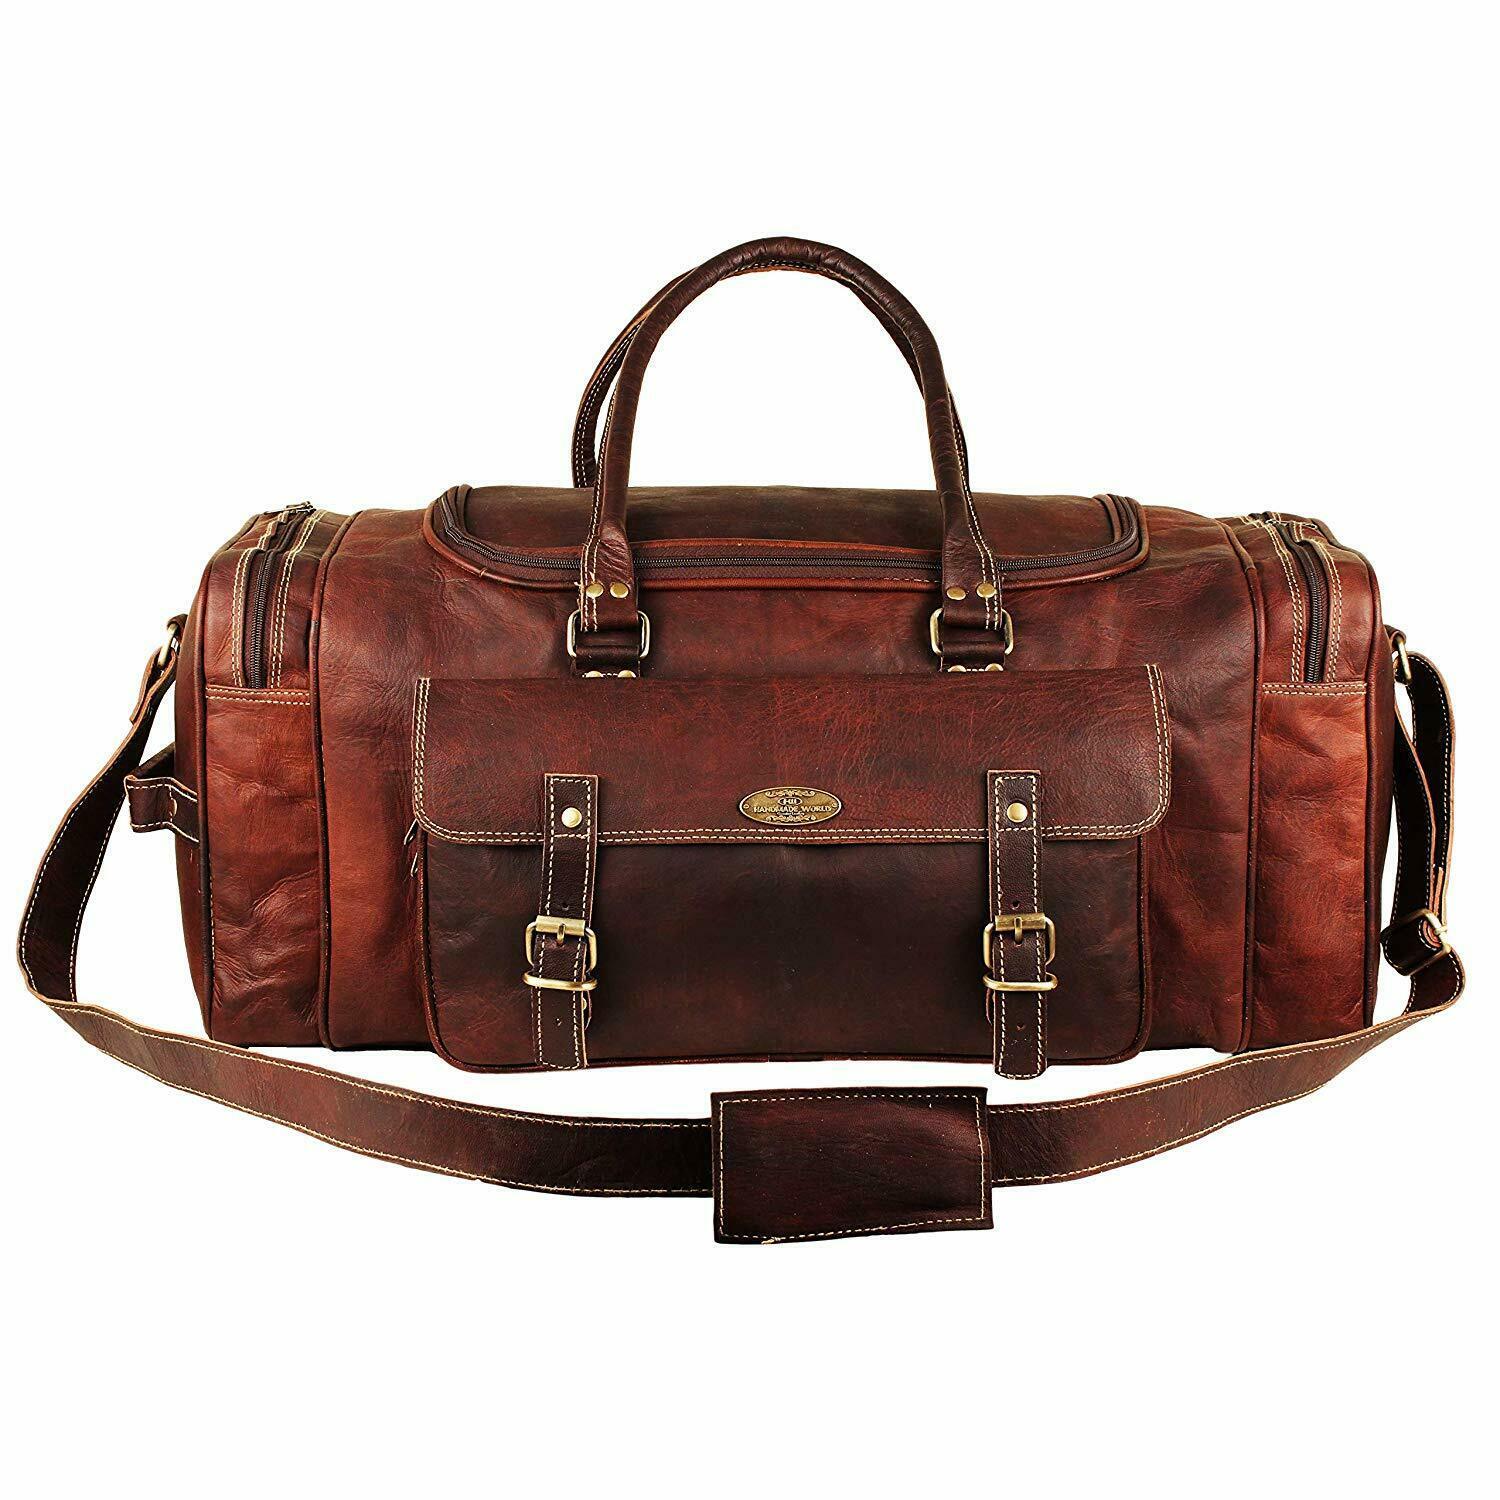 Leather Travel Bags For Men Vintage Leather Duffle Bag Women Carry On Travel Bag - Luggage